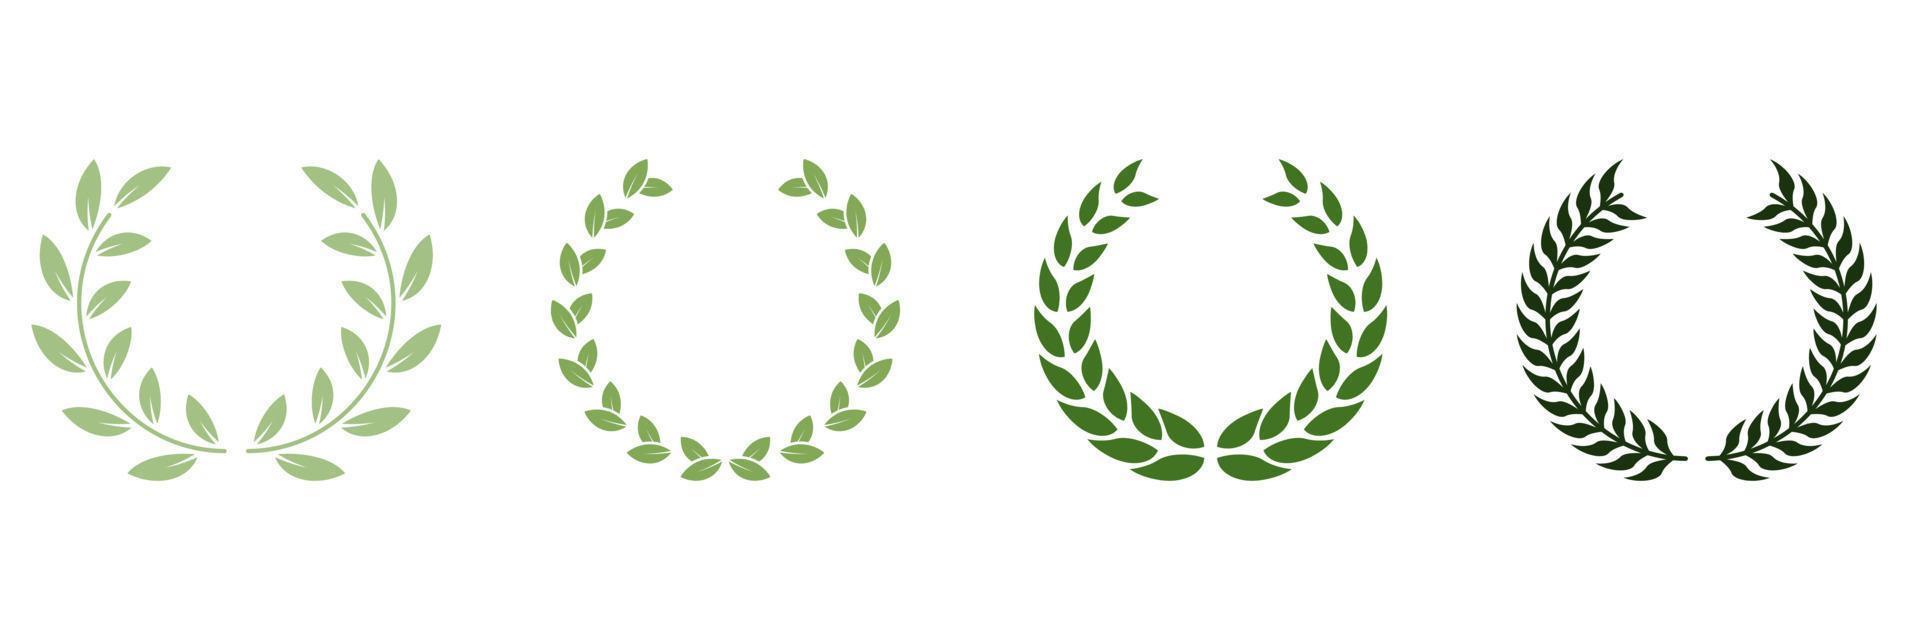 Green Olive Leaves Trophy. Vintage Champion Prize Symbol. Laurel Wreath Award Silhouette Icon. Circle Branch with Leaf Victory Emblem for Winner Pictogram. Wreath Laurel. Isolated Vector Illustration.